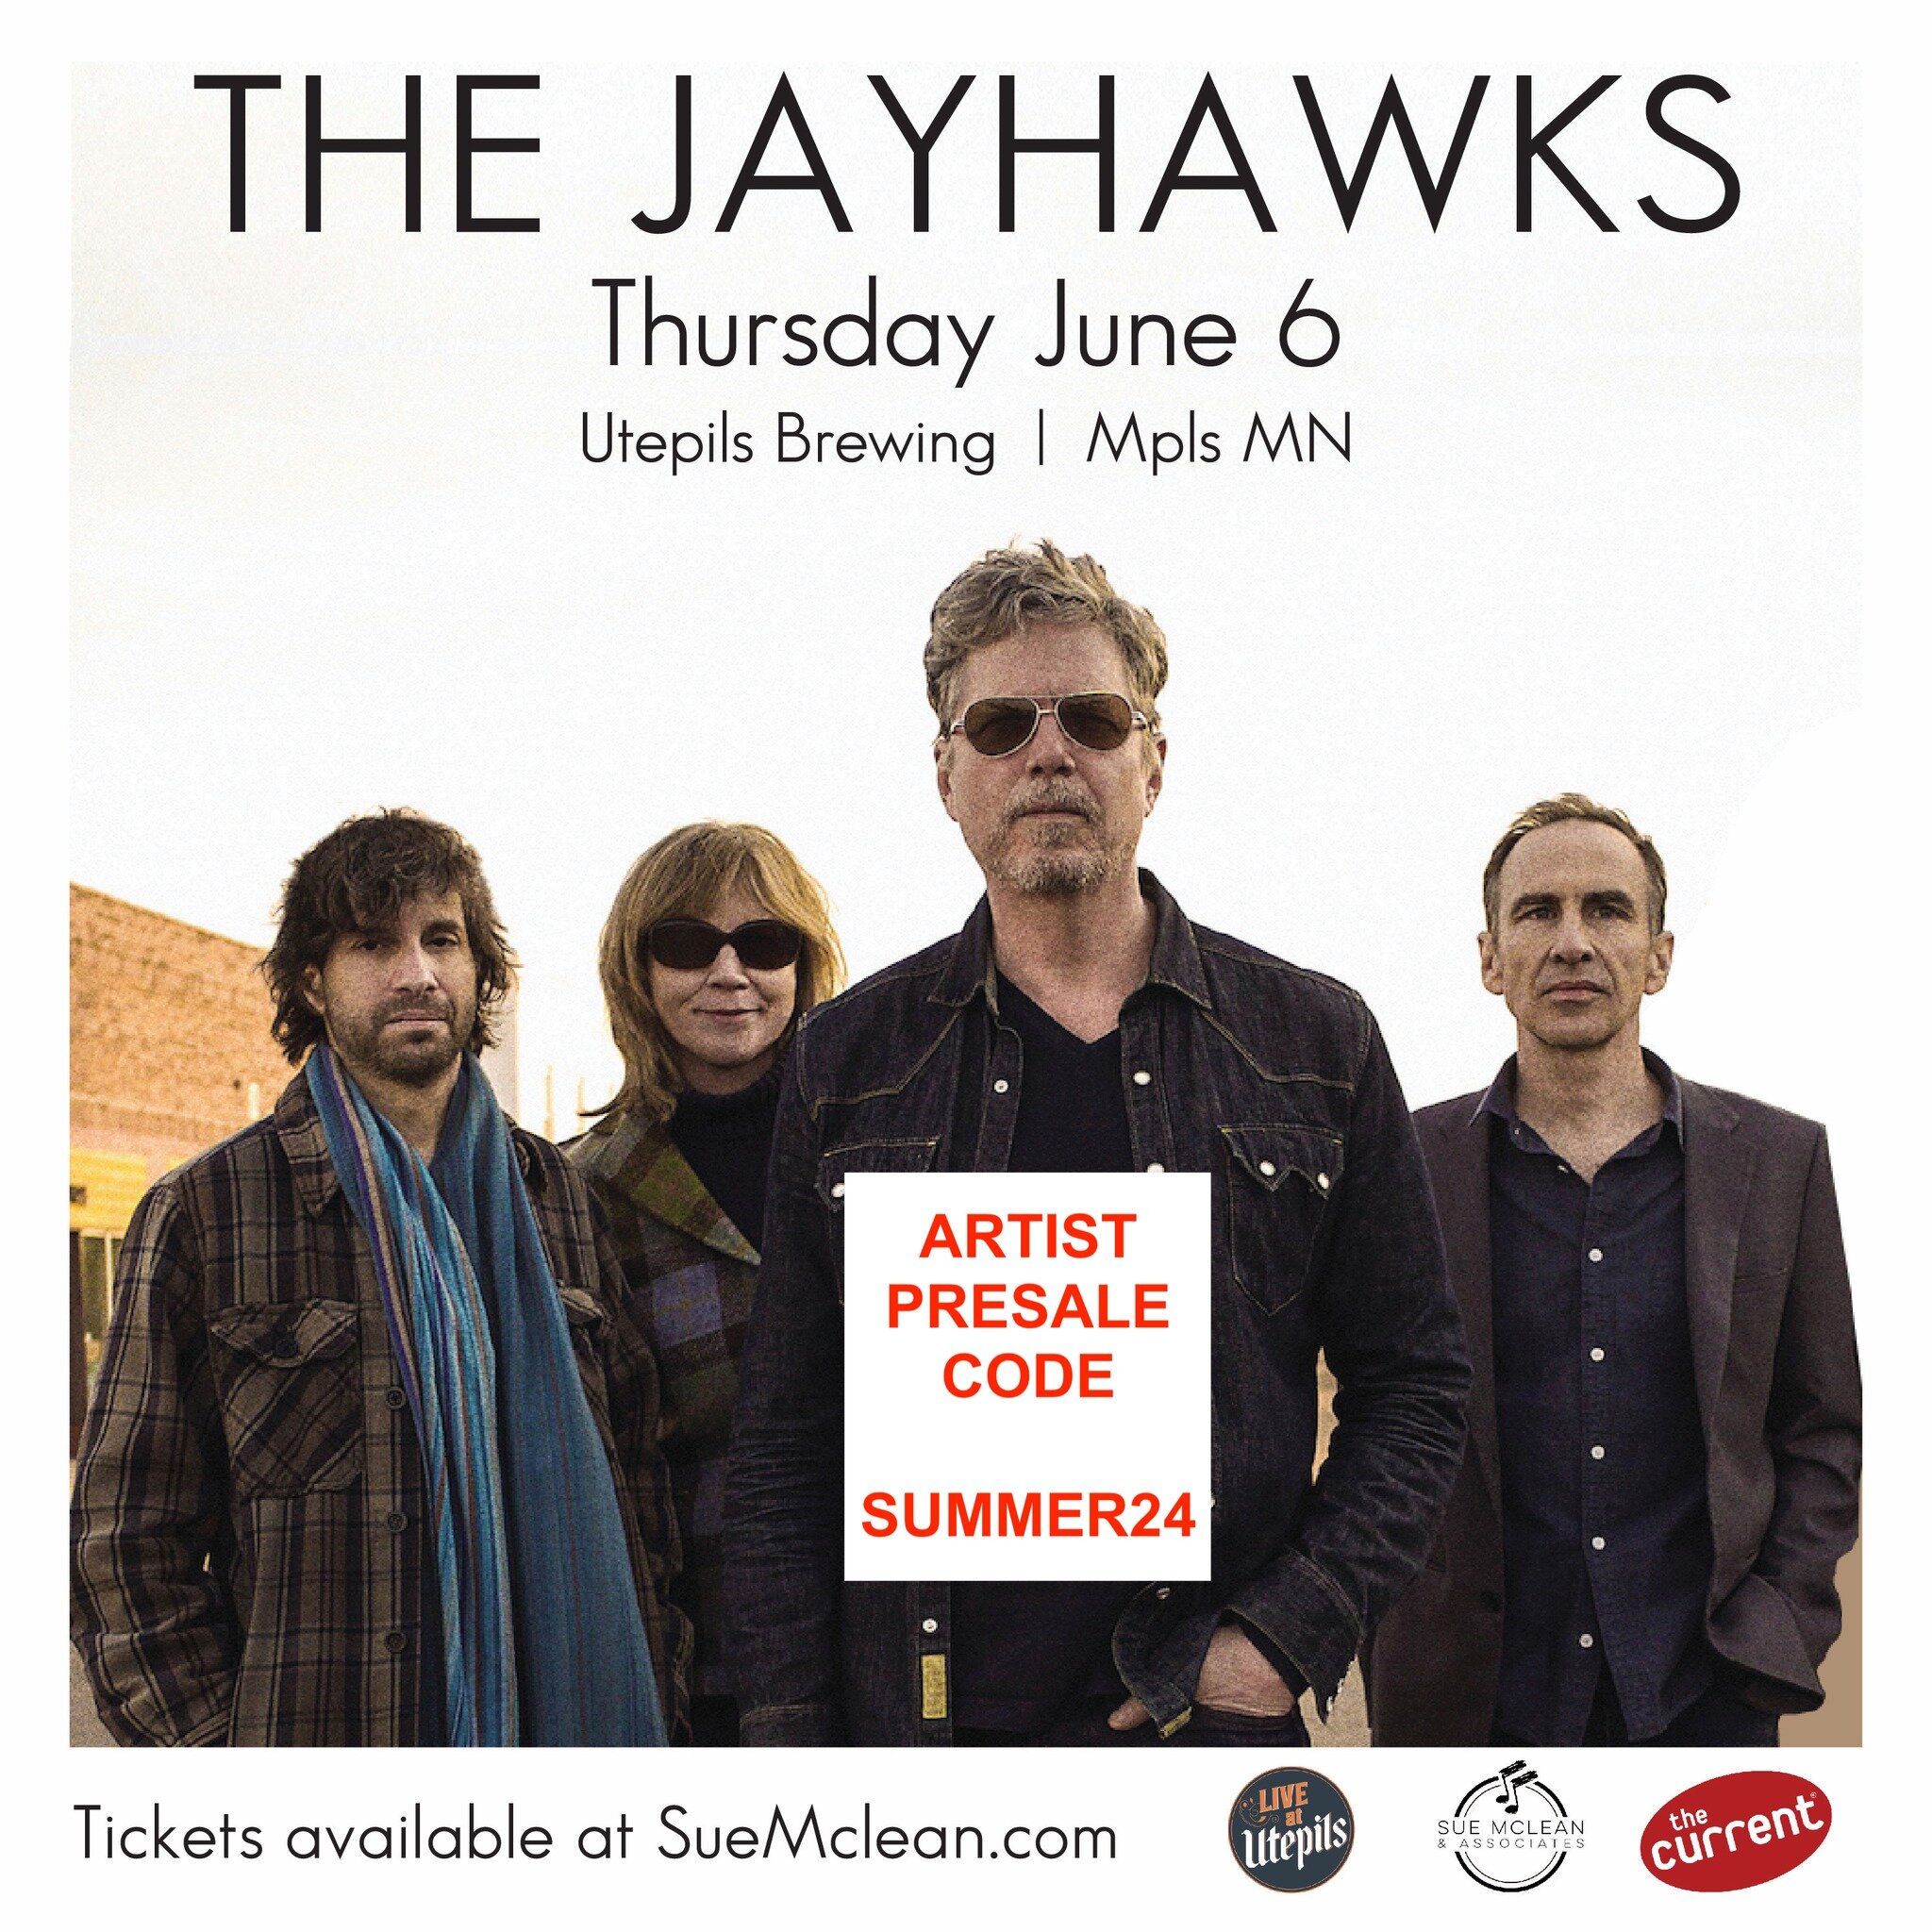 @thejayhawksofficial just announced an outdoor show on June 6 at @utepilsbrewing in Minneapolis - the only Jayhawks Twin Cities date of the summer. Tickets go on sale to the general public this Friday April 5 but there's a special artist presale toda